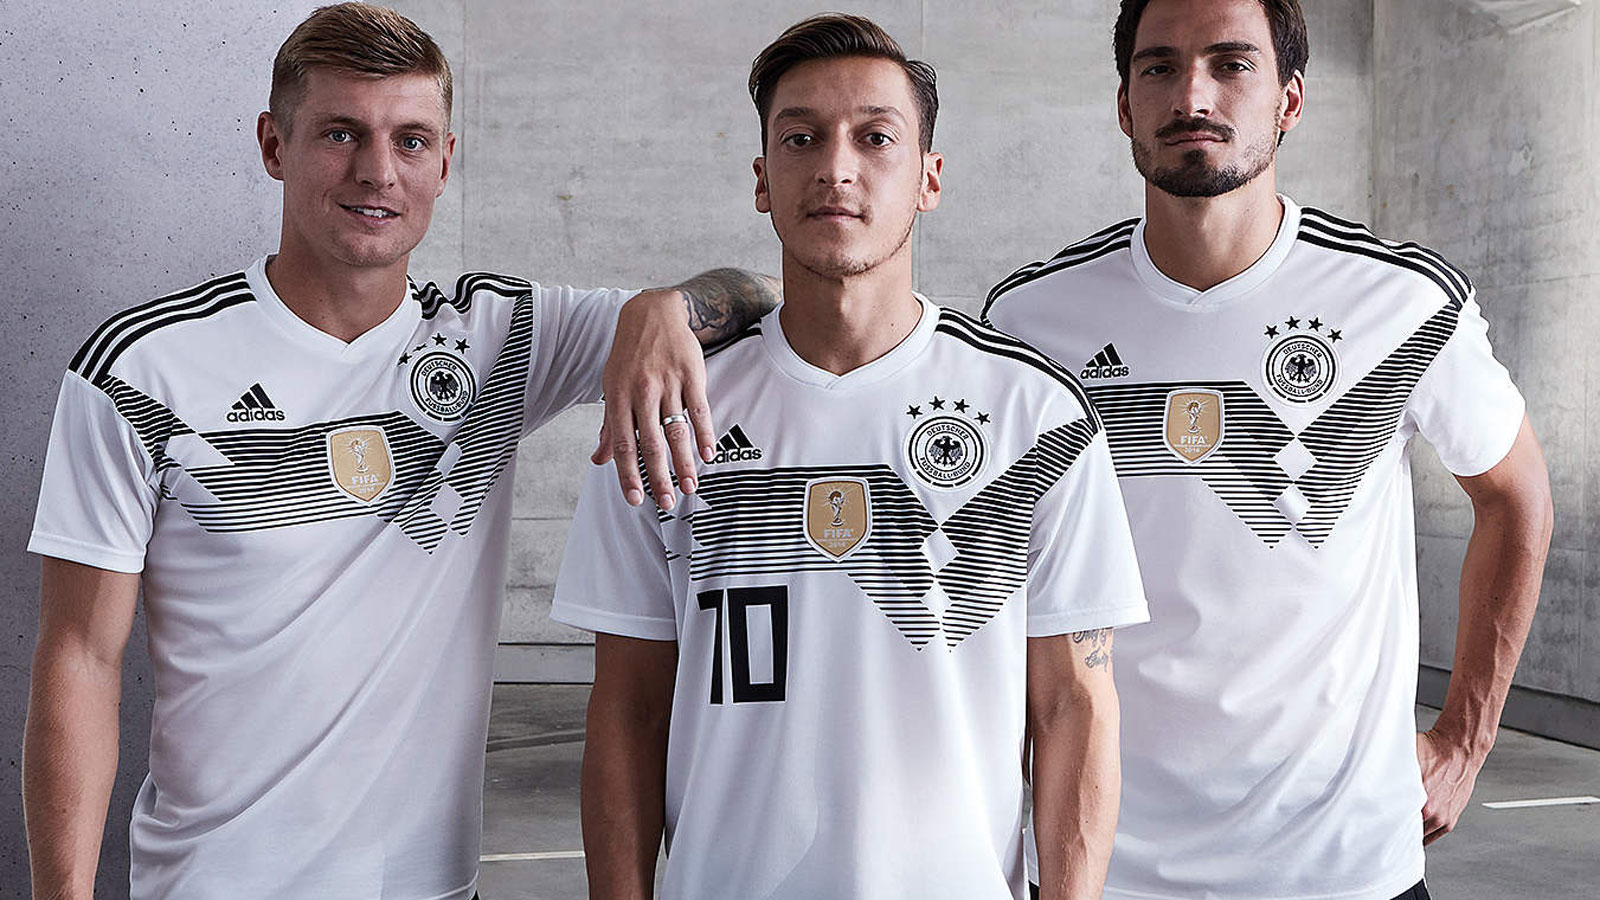 Germany National Team Wallpaper HD with resolution 1600x900 pixel. You can make this wallpaper for your Mac or Windows Desktop Background, iPhone, Android or Tablet and another Smartphone device